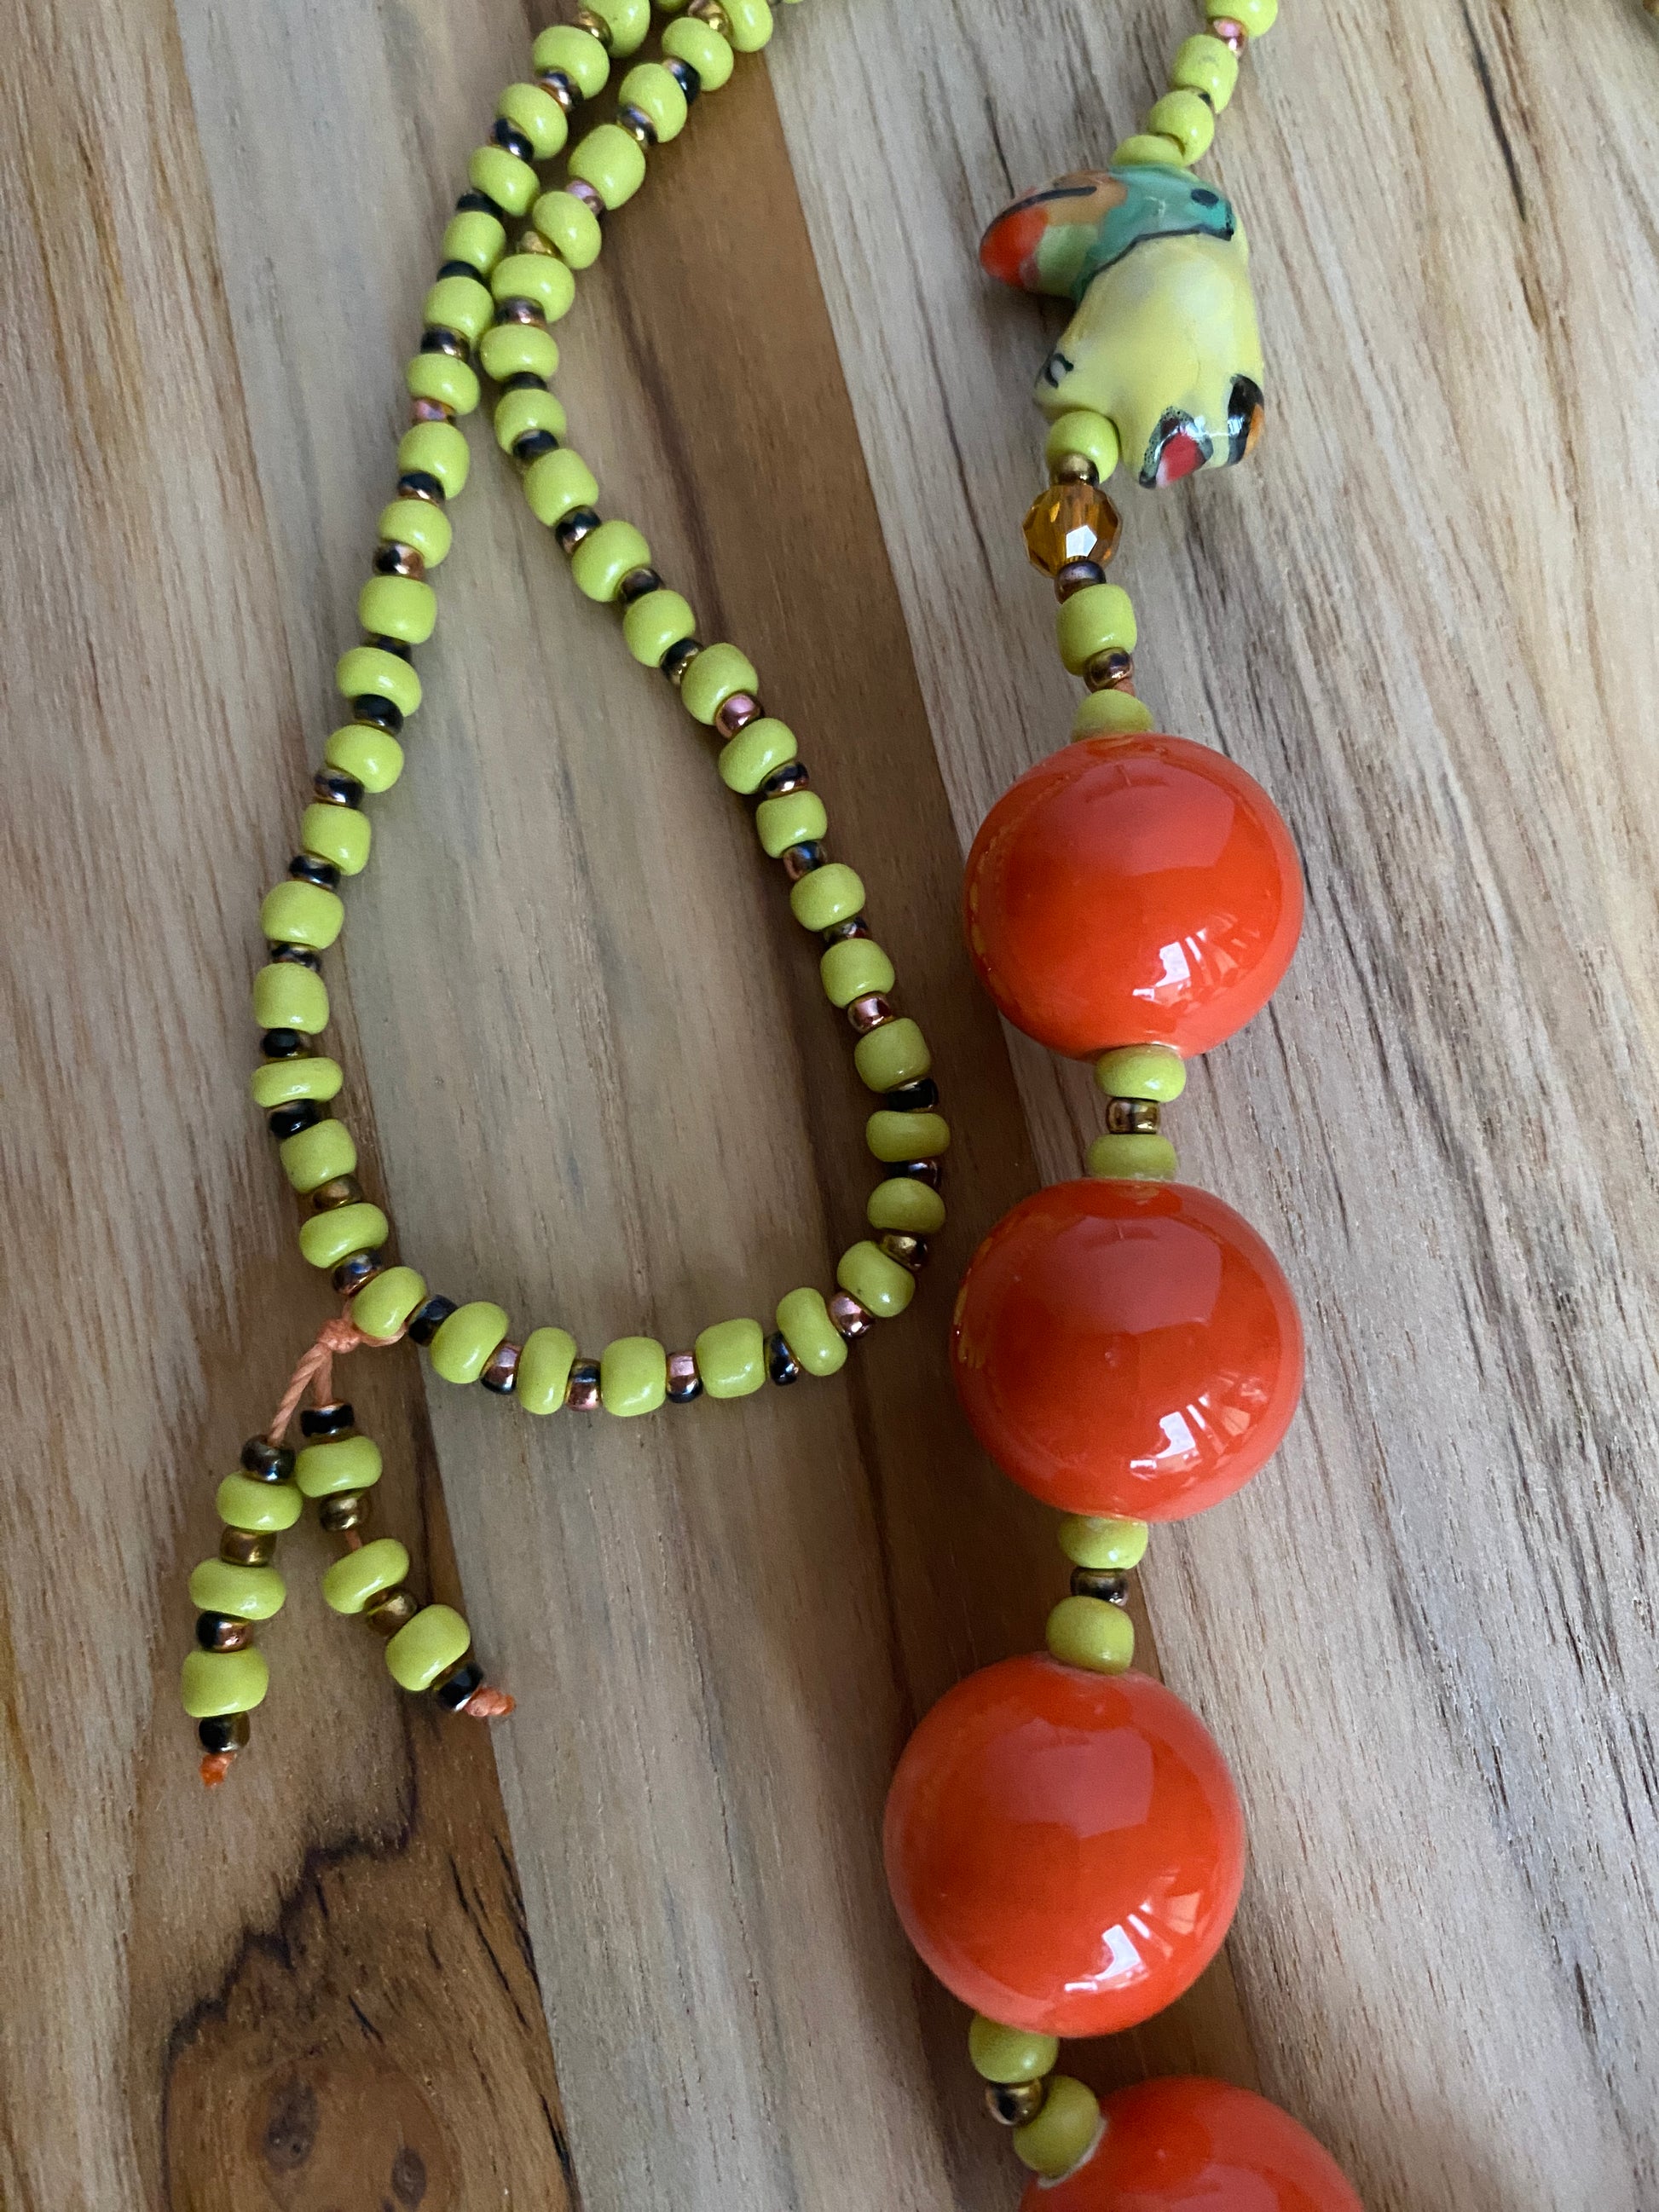 28" Long Large Orange Ceramic Beaded Necklace with Parrot and Yellow Beads - My Urban Gems